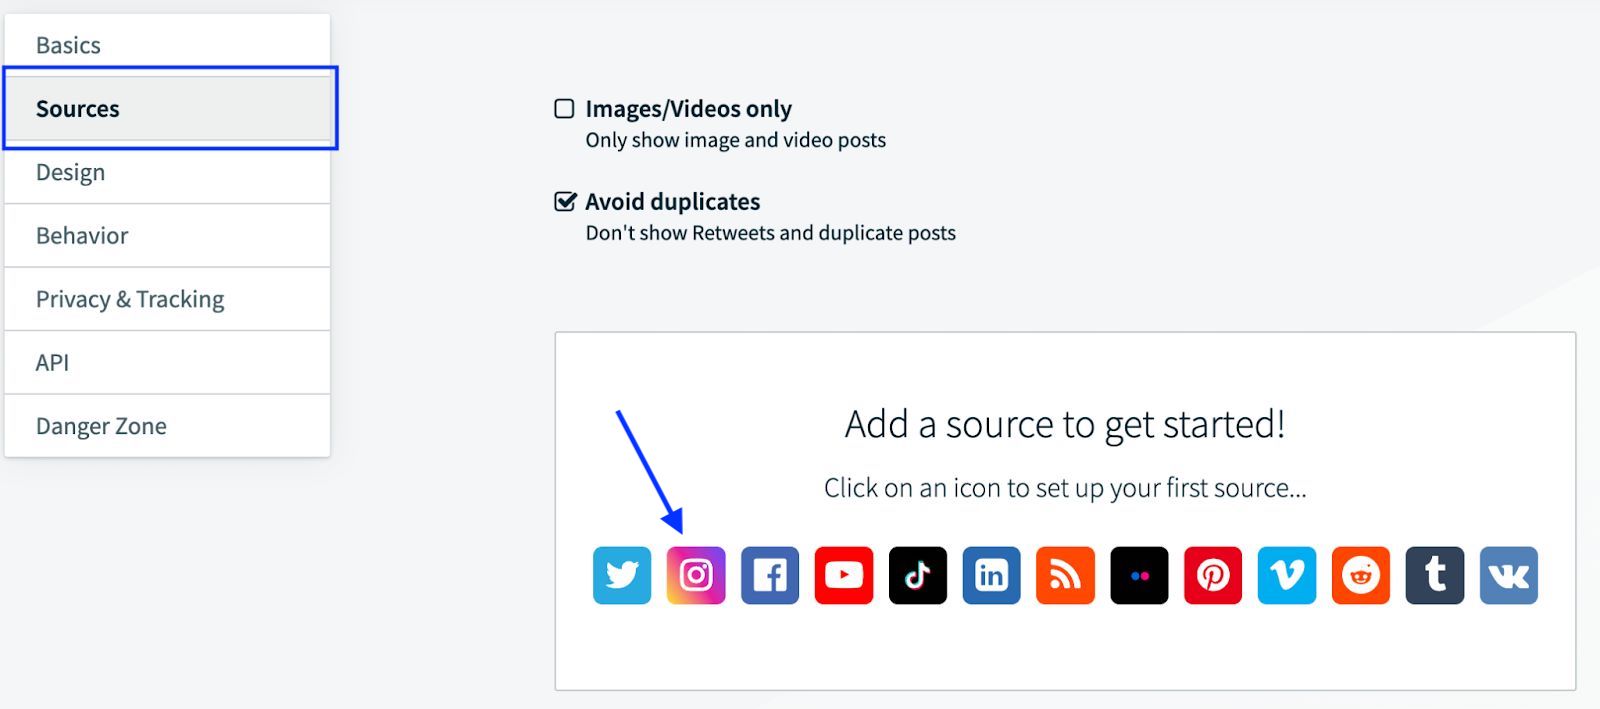 This image shows a user interface for setting up social media sources in an administrative panel, with options for selecting content sources like Twitter, Instagram, Facebook, YouTube, and others. The panel includes options to filter for images/videos only and to avoid duplicate posts.